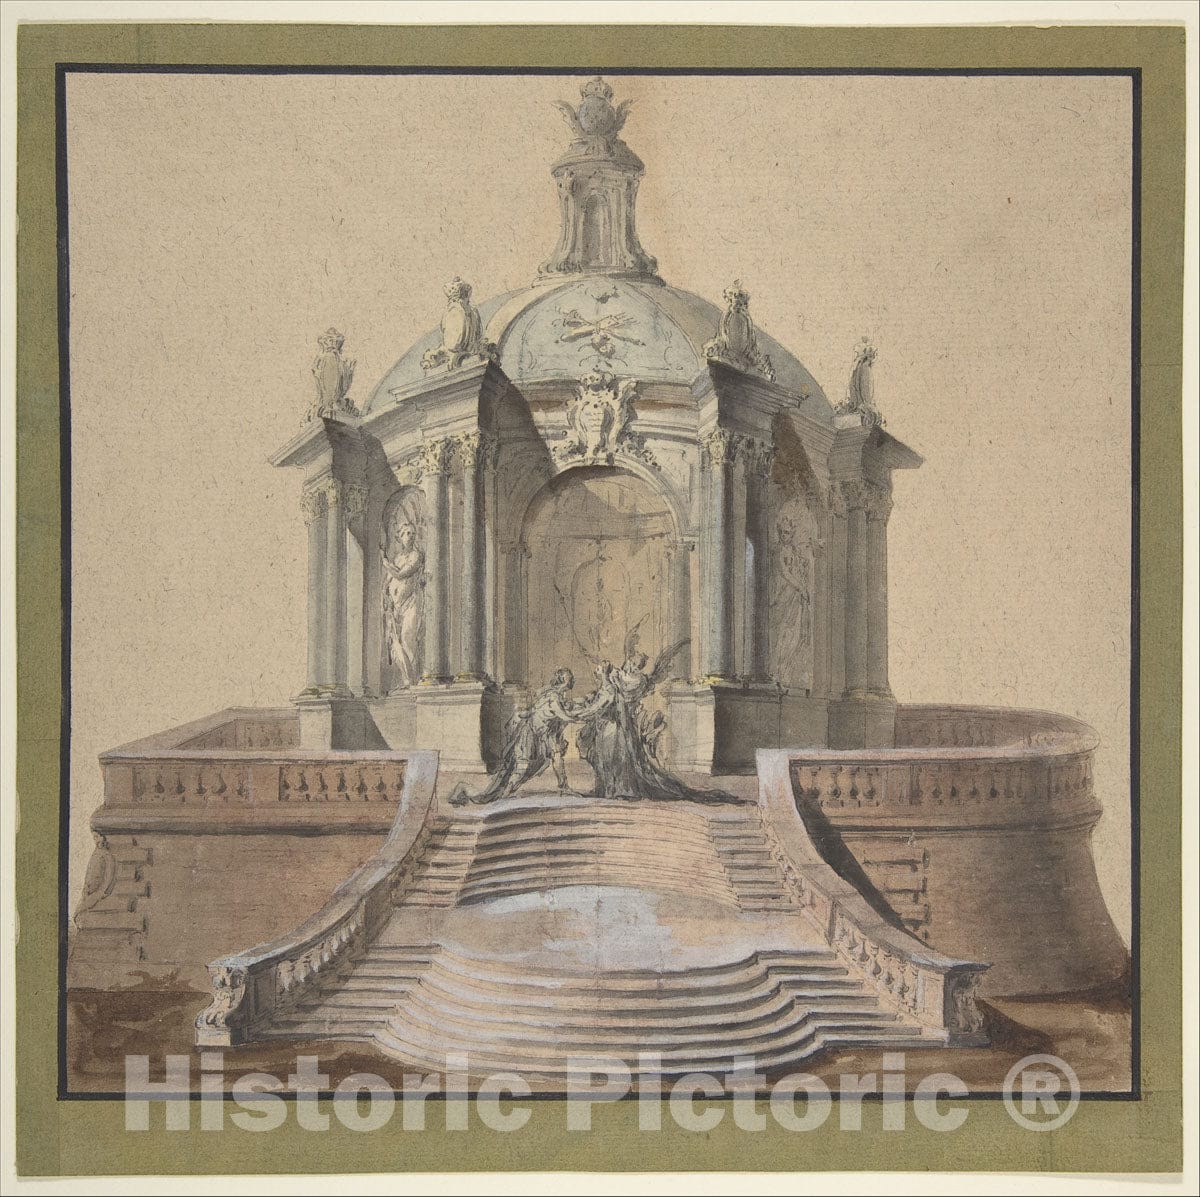 Art Print : Guillaume Thomas Raphaël Taraval - Design for Festival Architecture for an Entry into Paris for The King of Sweden, Frederick I of Hesse 1 : Vintage Wall Art